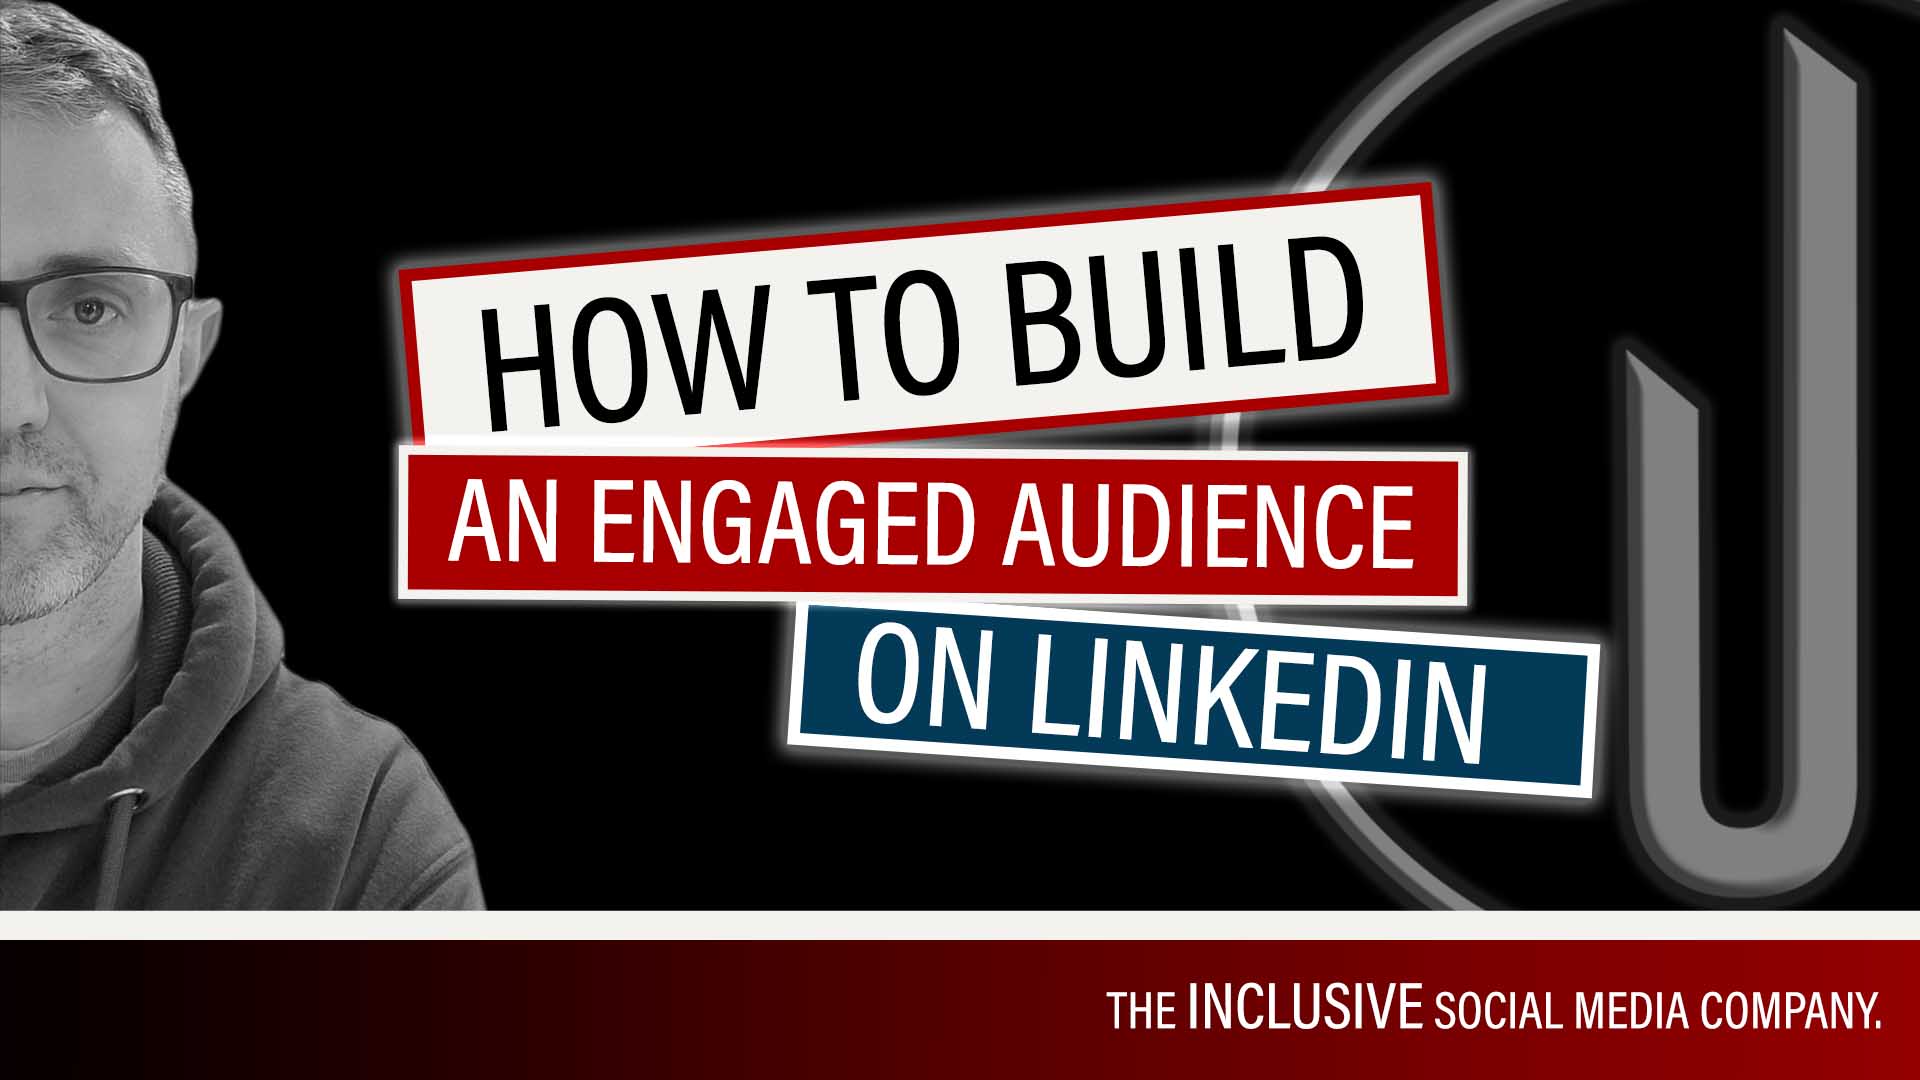 How to build an engaged audience on LinkedIn